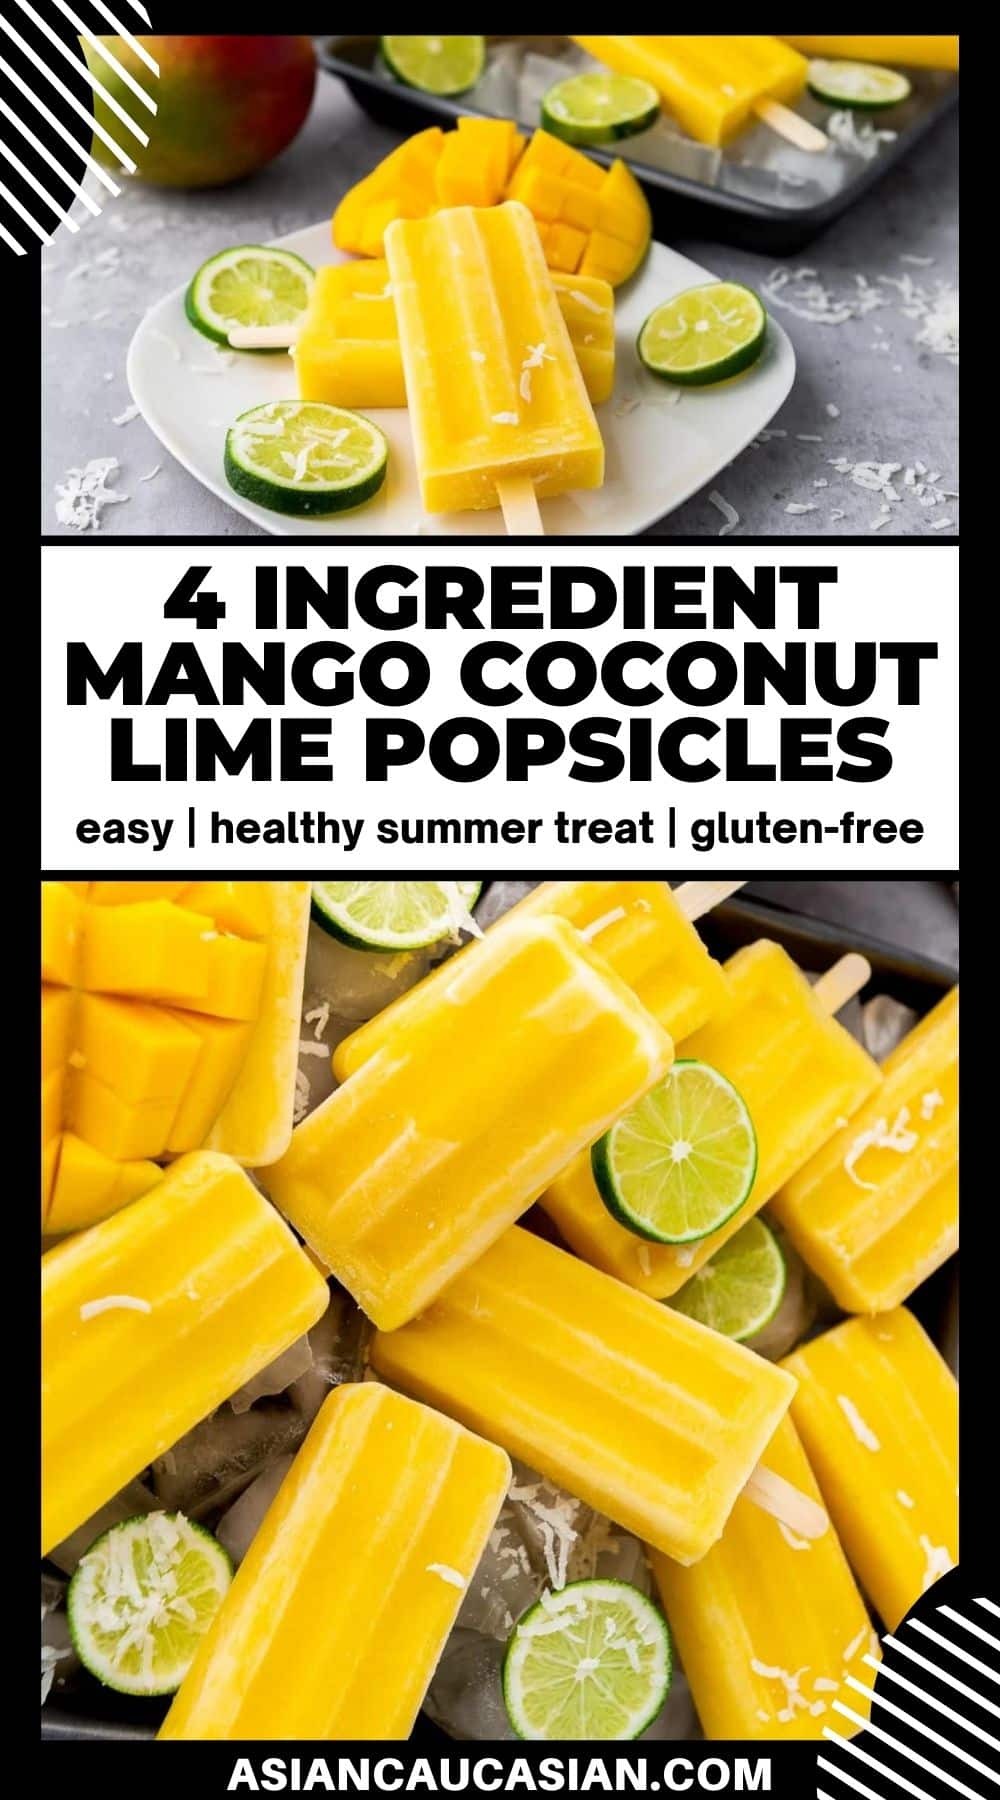 Mango coconut lime popsicles stacked on top of a white plate with lemon slices and more popsicles and a whole mango in the background, on top of a gray surface. And mango popsicles stacked on top of each other on a silver tray with lime slices on top.